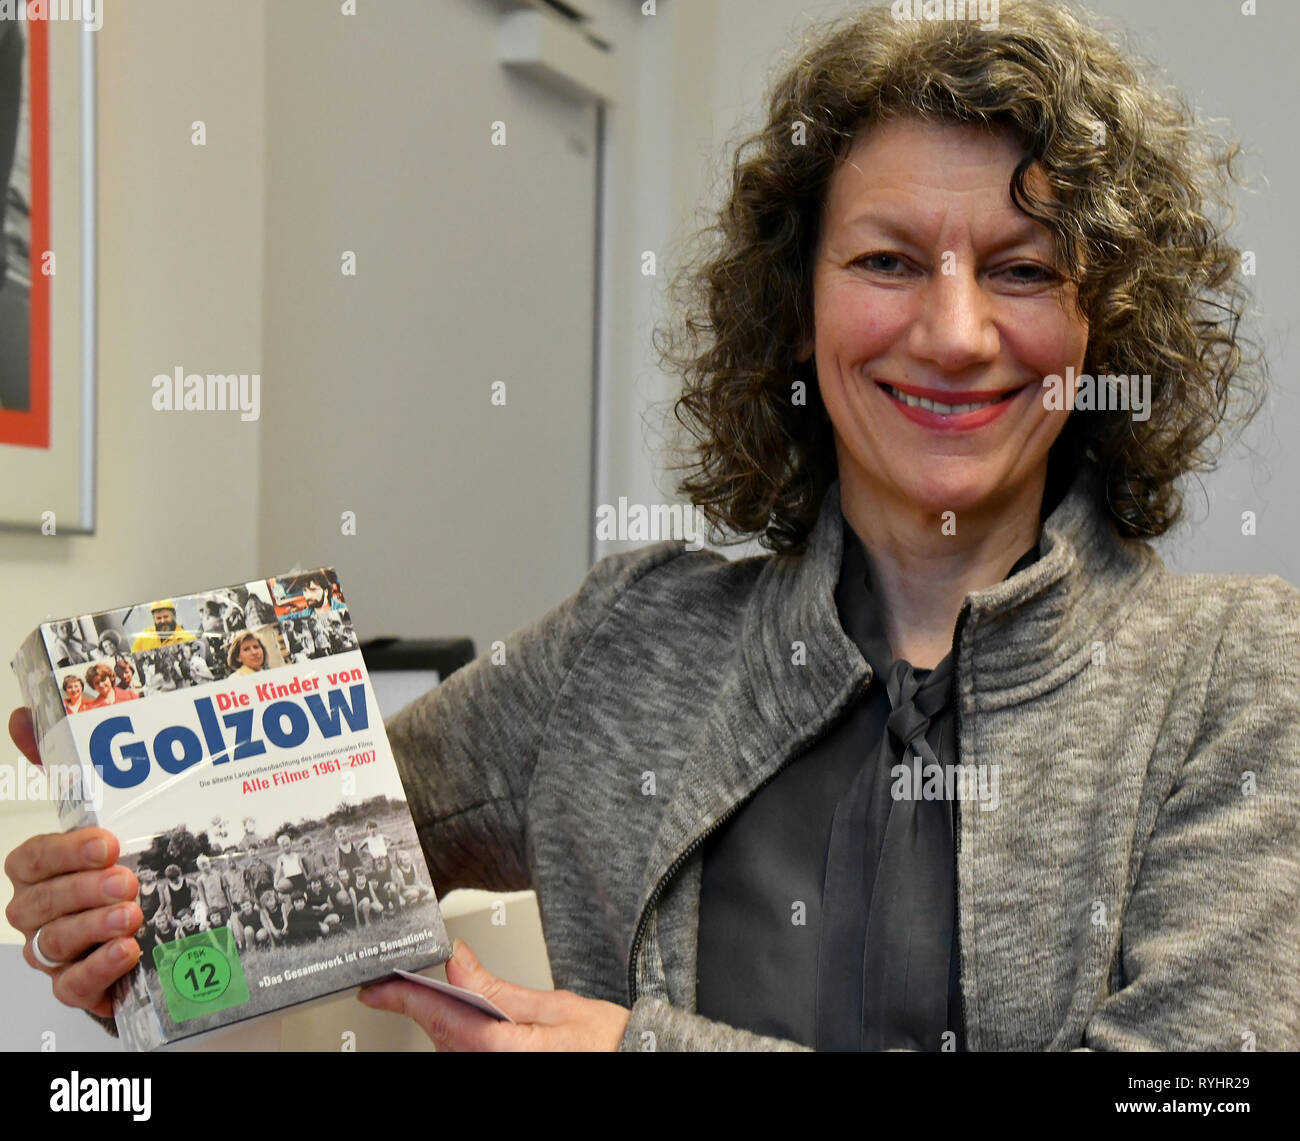 14 March 2019, Brandenburg, Potsdam: Ursula von Keitz, director of the  Filmmuseum Potsdam, holds the DVD edition of all films "Children of Golzow"  in her hands. The director couple Junge have handed